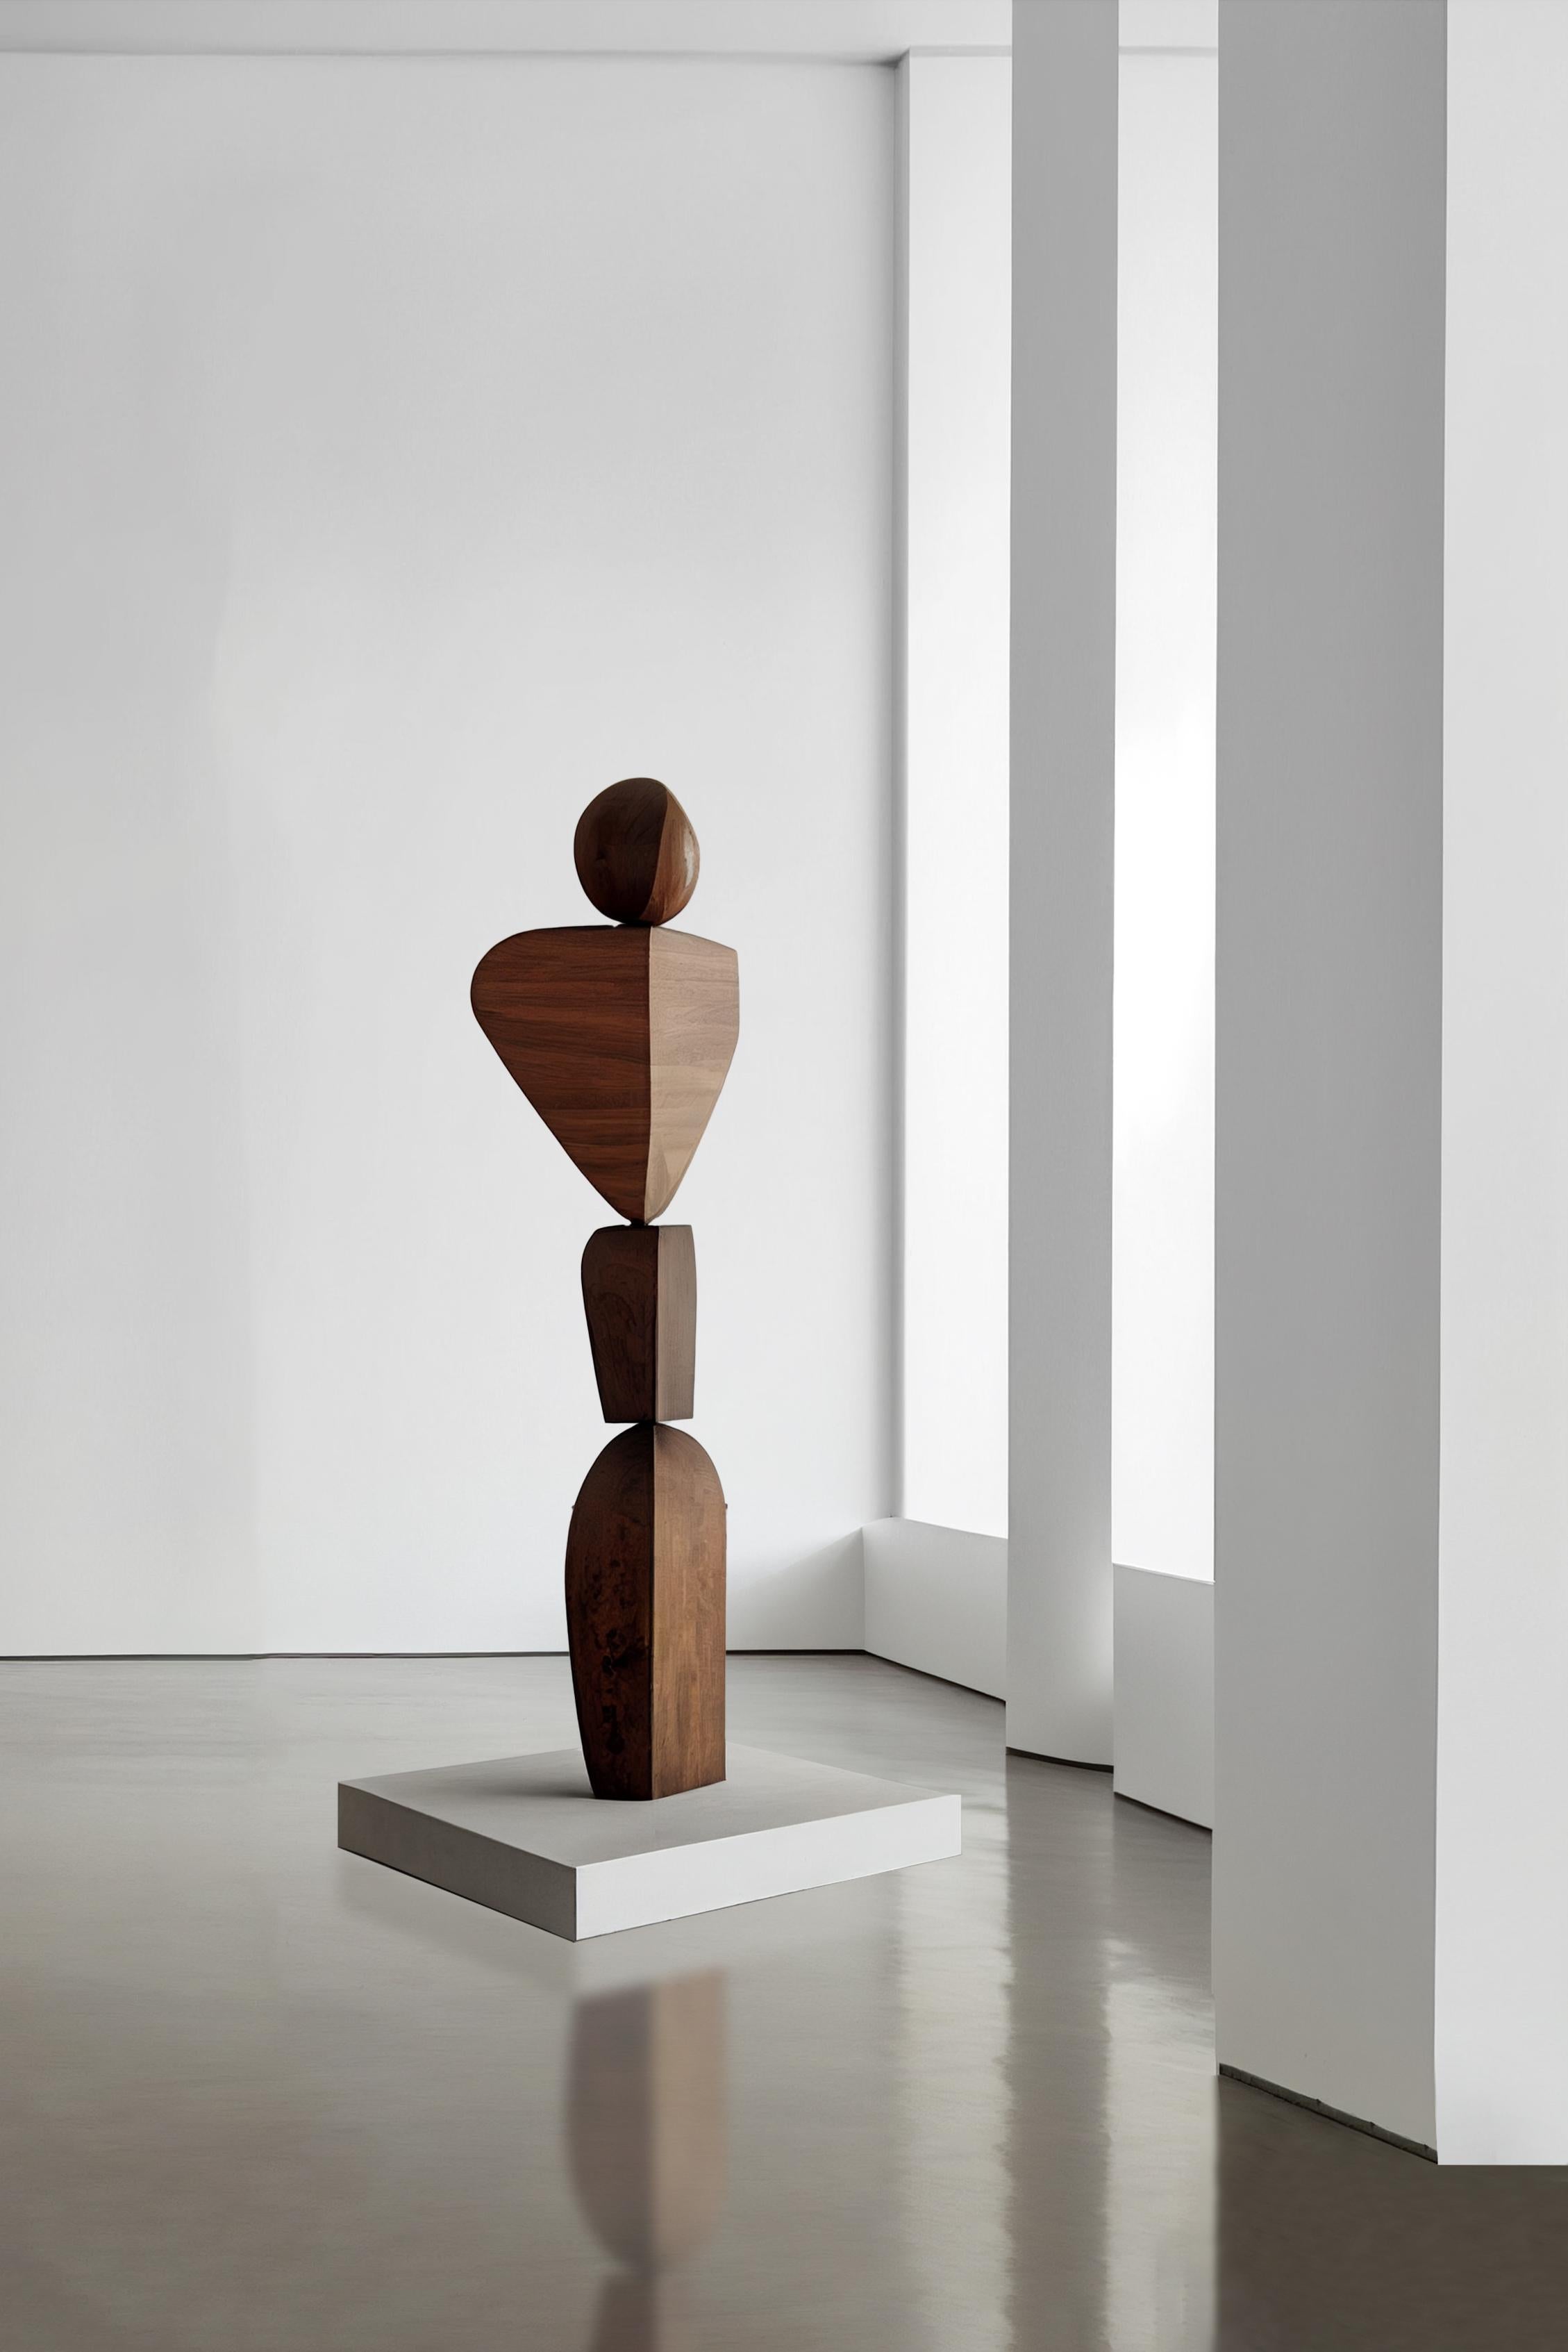 “Still Stand” Sculptures by Joel Escalona

Joel Escalona's wooden standing sculptures are objects of raw beauty and serene grace. Each one is a testament to the power of the material, with smooth curves that flow into one another, inviting the